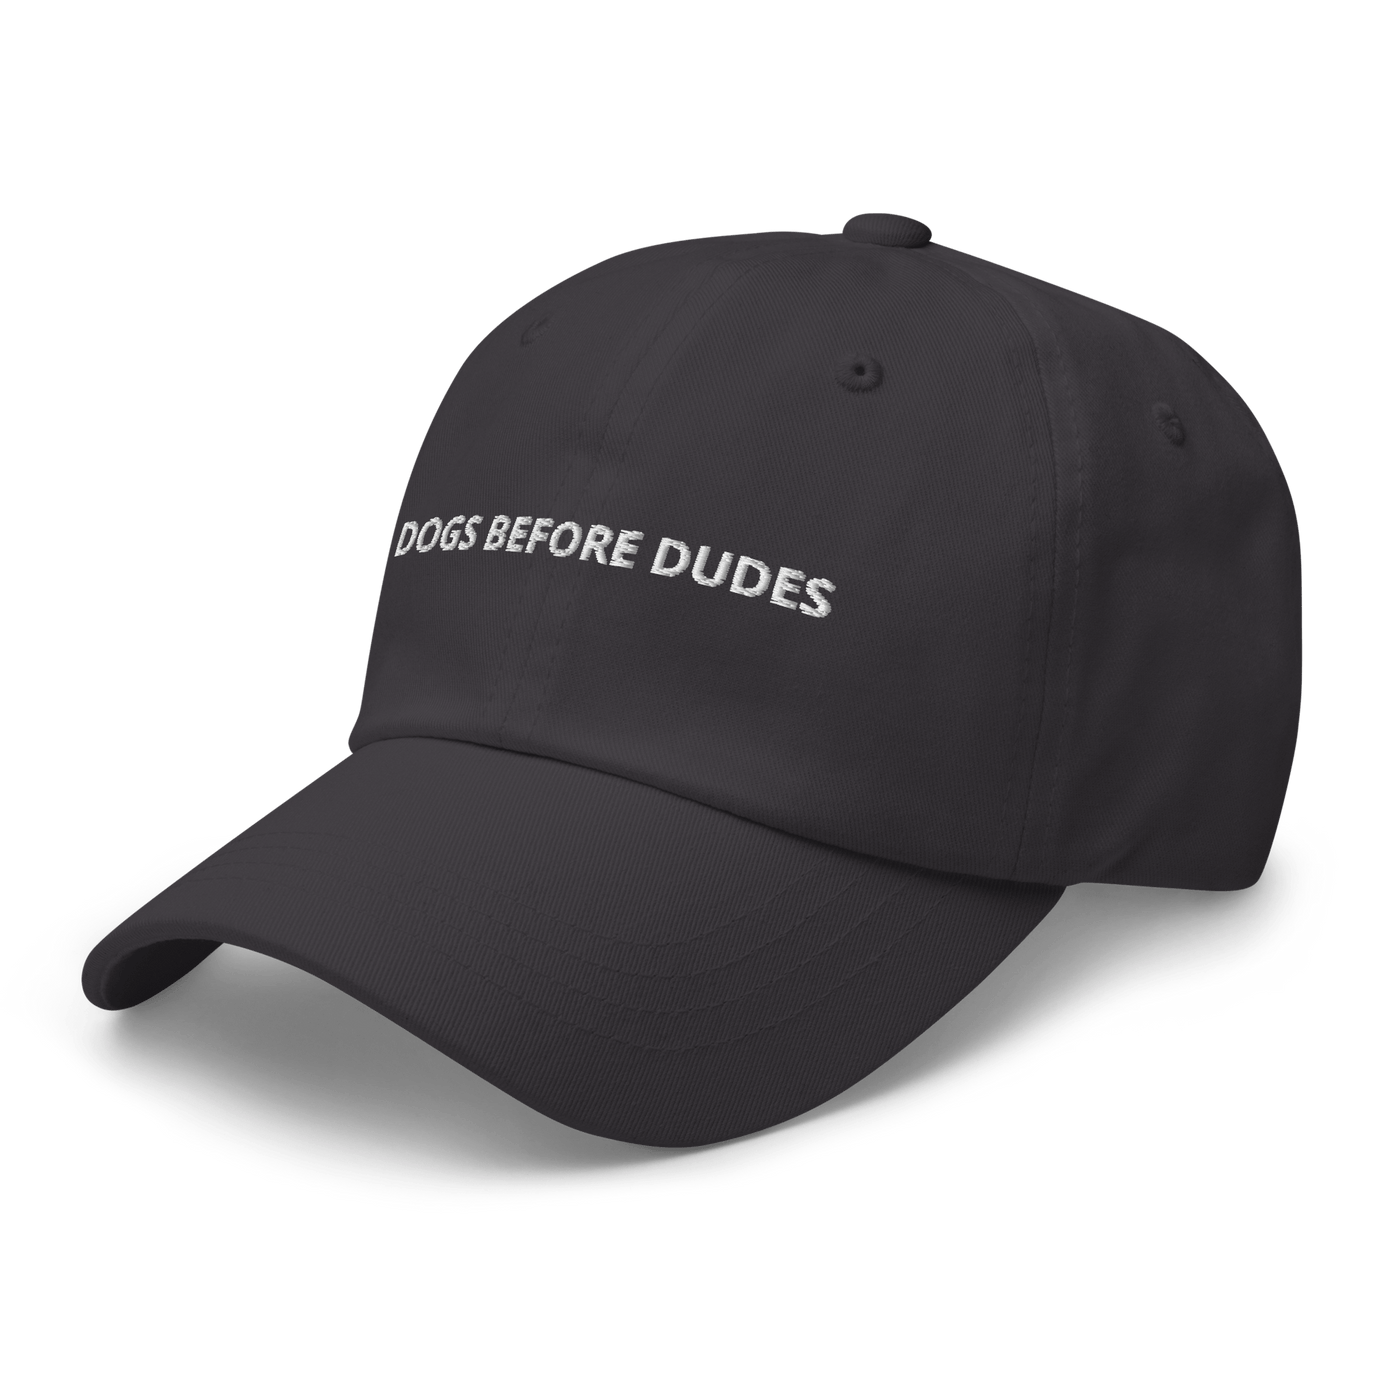 Dogs before Dudes Dad hat - Dark Grey - - Just Another Cap Store